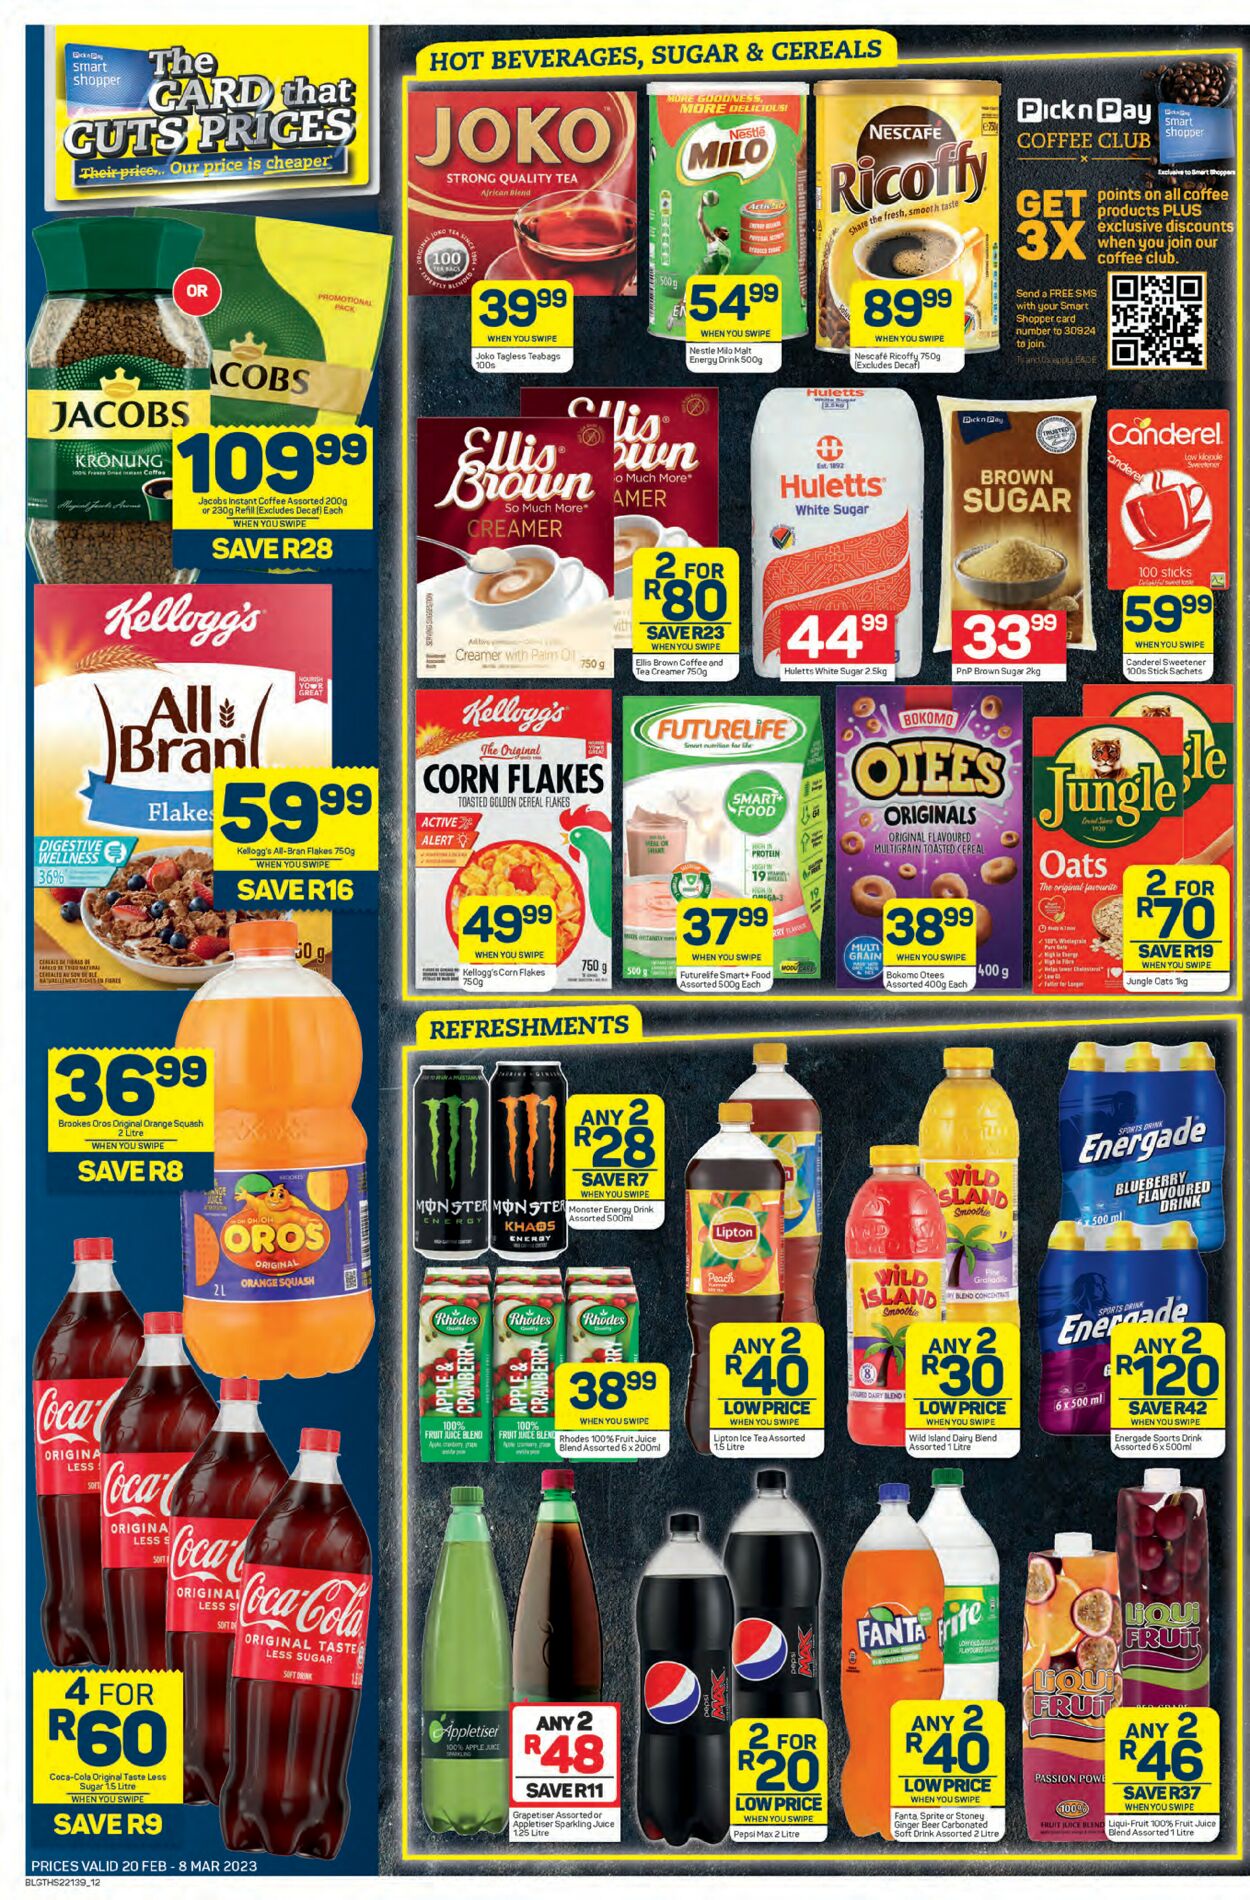 Pick n Pay Catalogue - 2023/02/20-2023/03/08 (Page 12)